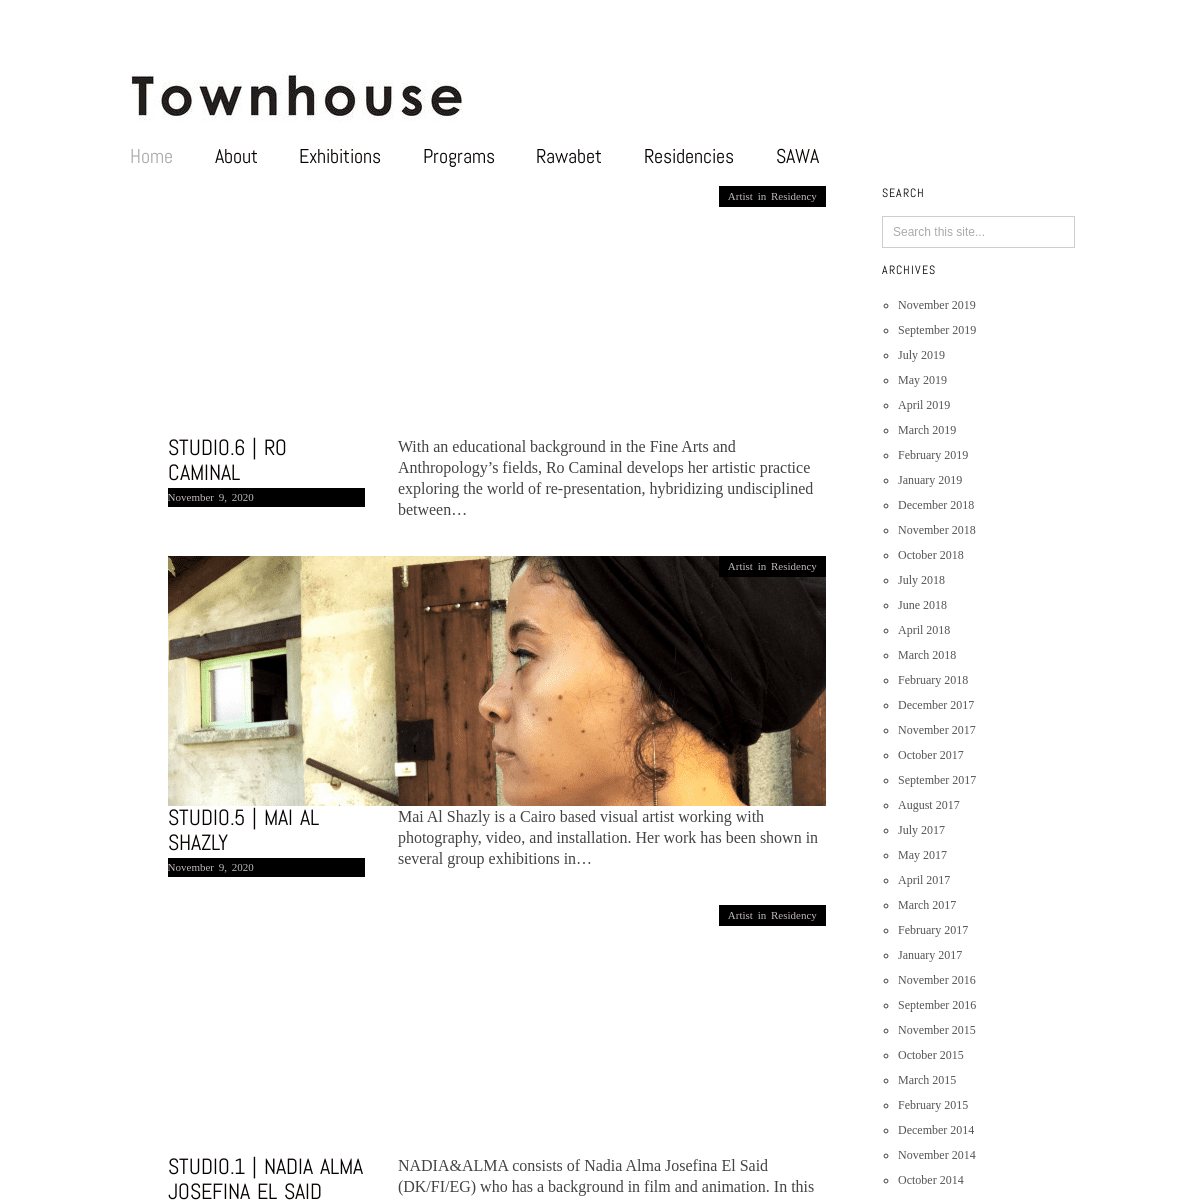 A complete backup of https://thetownhousegallery.com